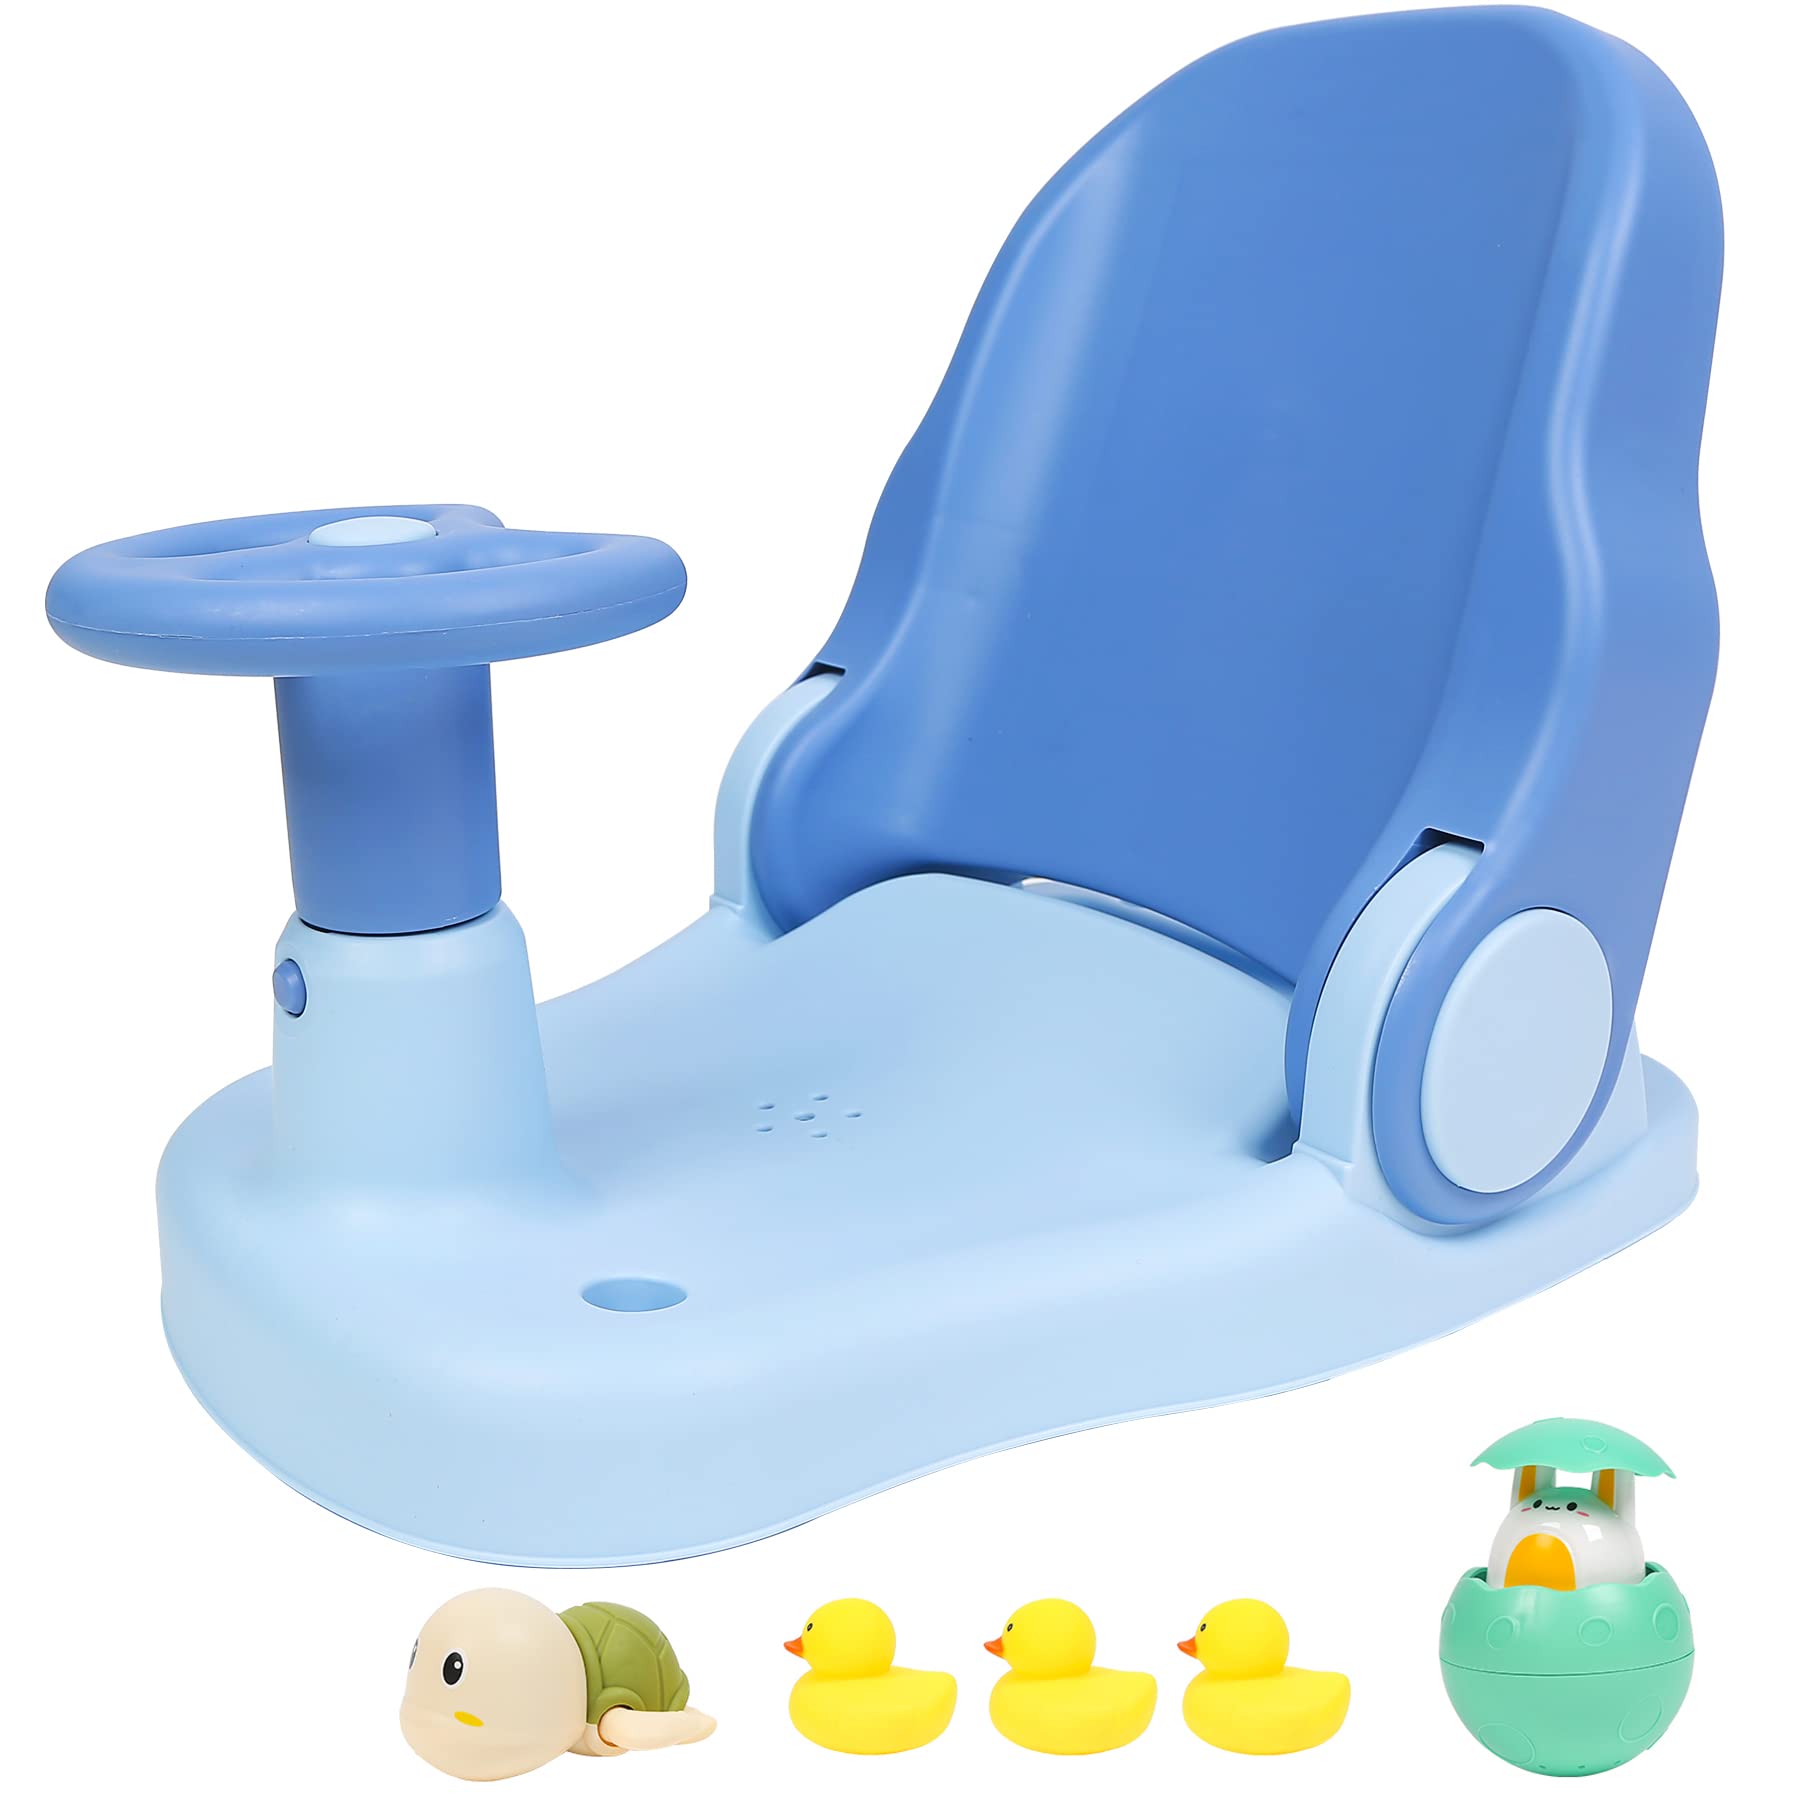 Morefeel Baby Bath Seat,Baby Bathtub Seat for Sit-up,Baby Shower